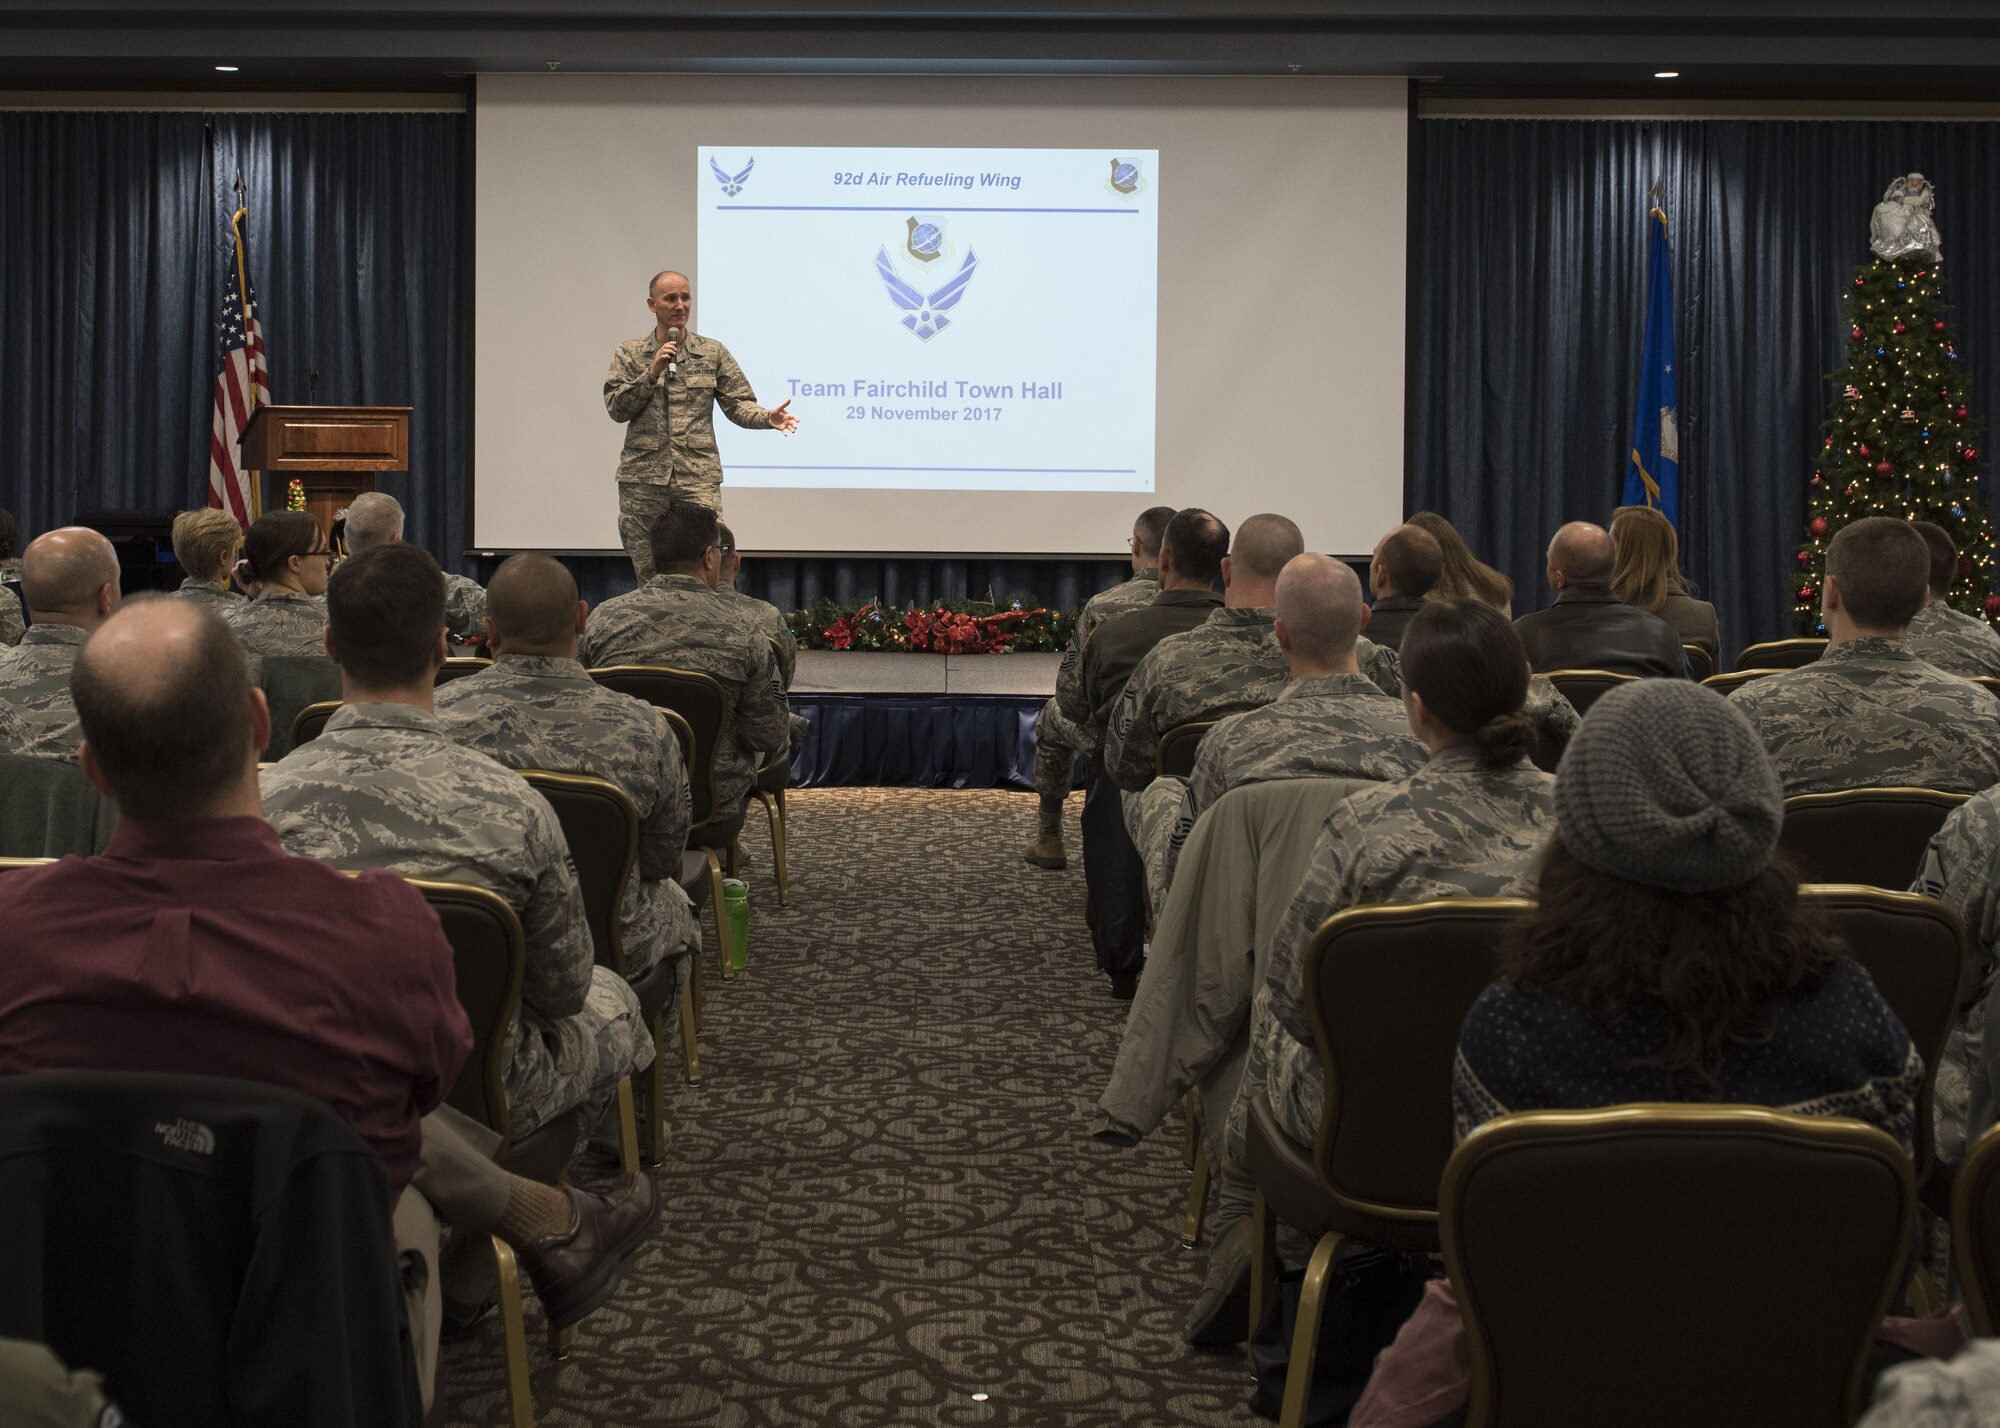 Col. Ryan Samuelson, 92nd Air Refueling Wing commander, kicks off the base town hall meeting at the Red Morgan Center, Fairchild Air Force Base, Washington, Nov. 29, 2017. The town hall meeting gives base leadership an opportunity to address quality-of-life topics that affect base members and their families. (U.S. Air Force photo/Senior Airman Ryan Lackey)